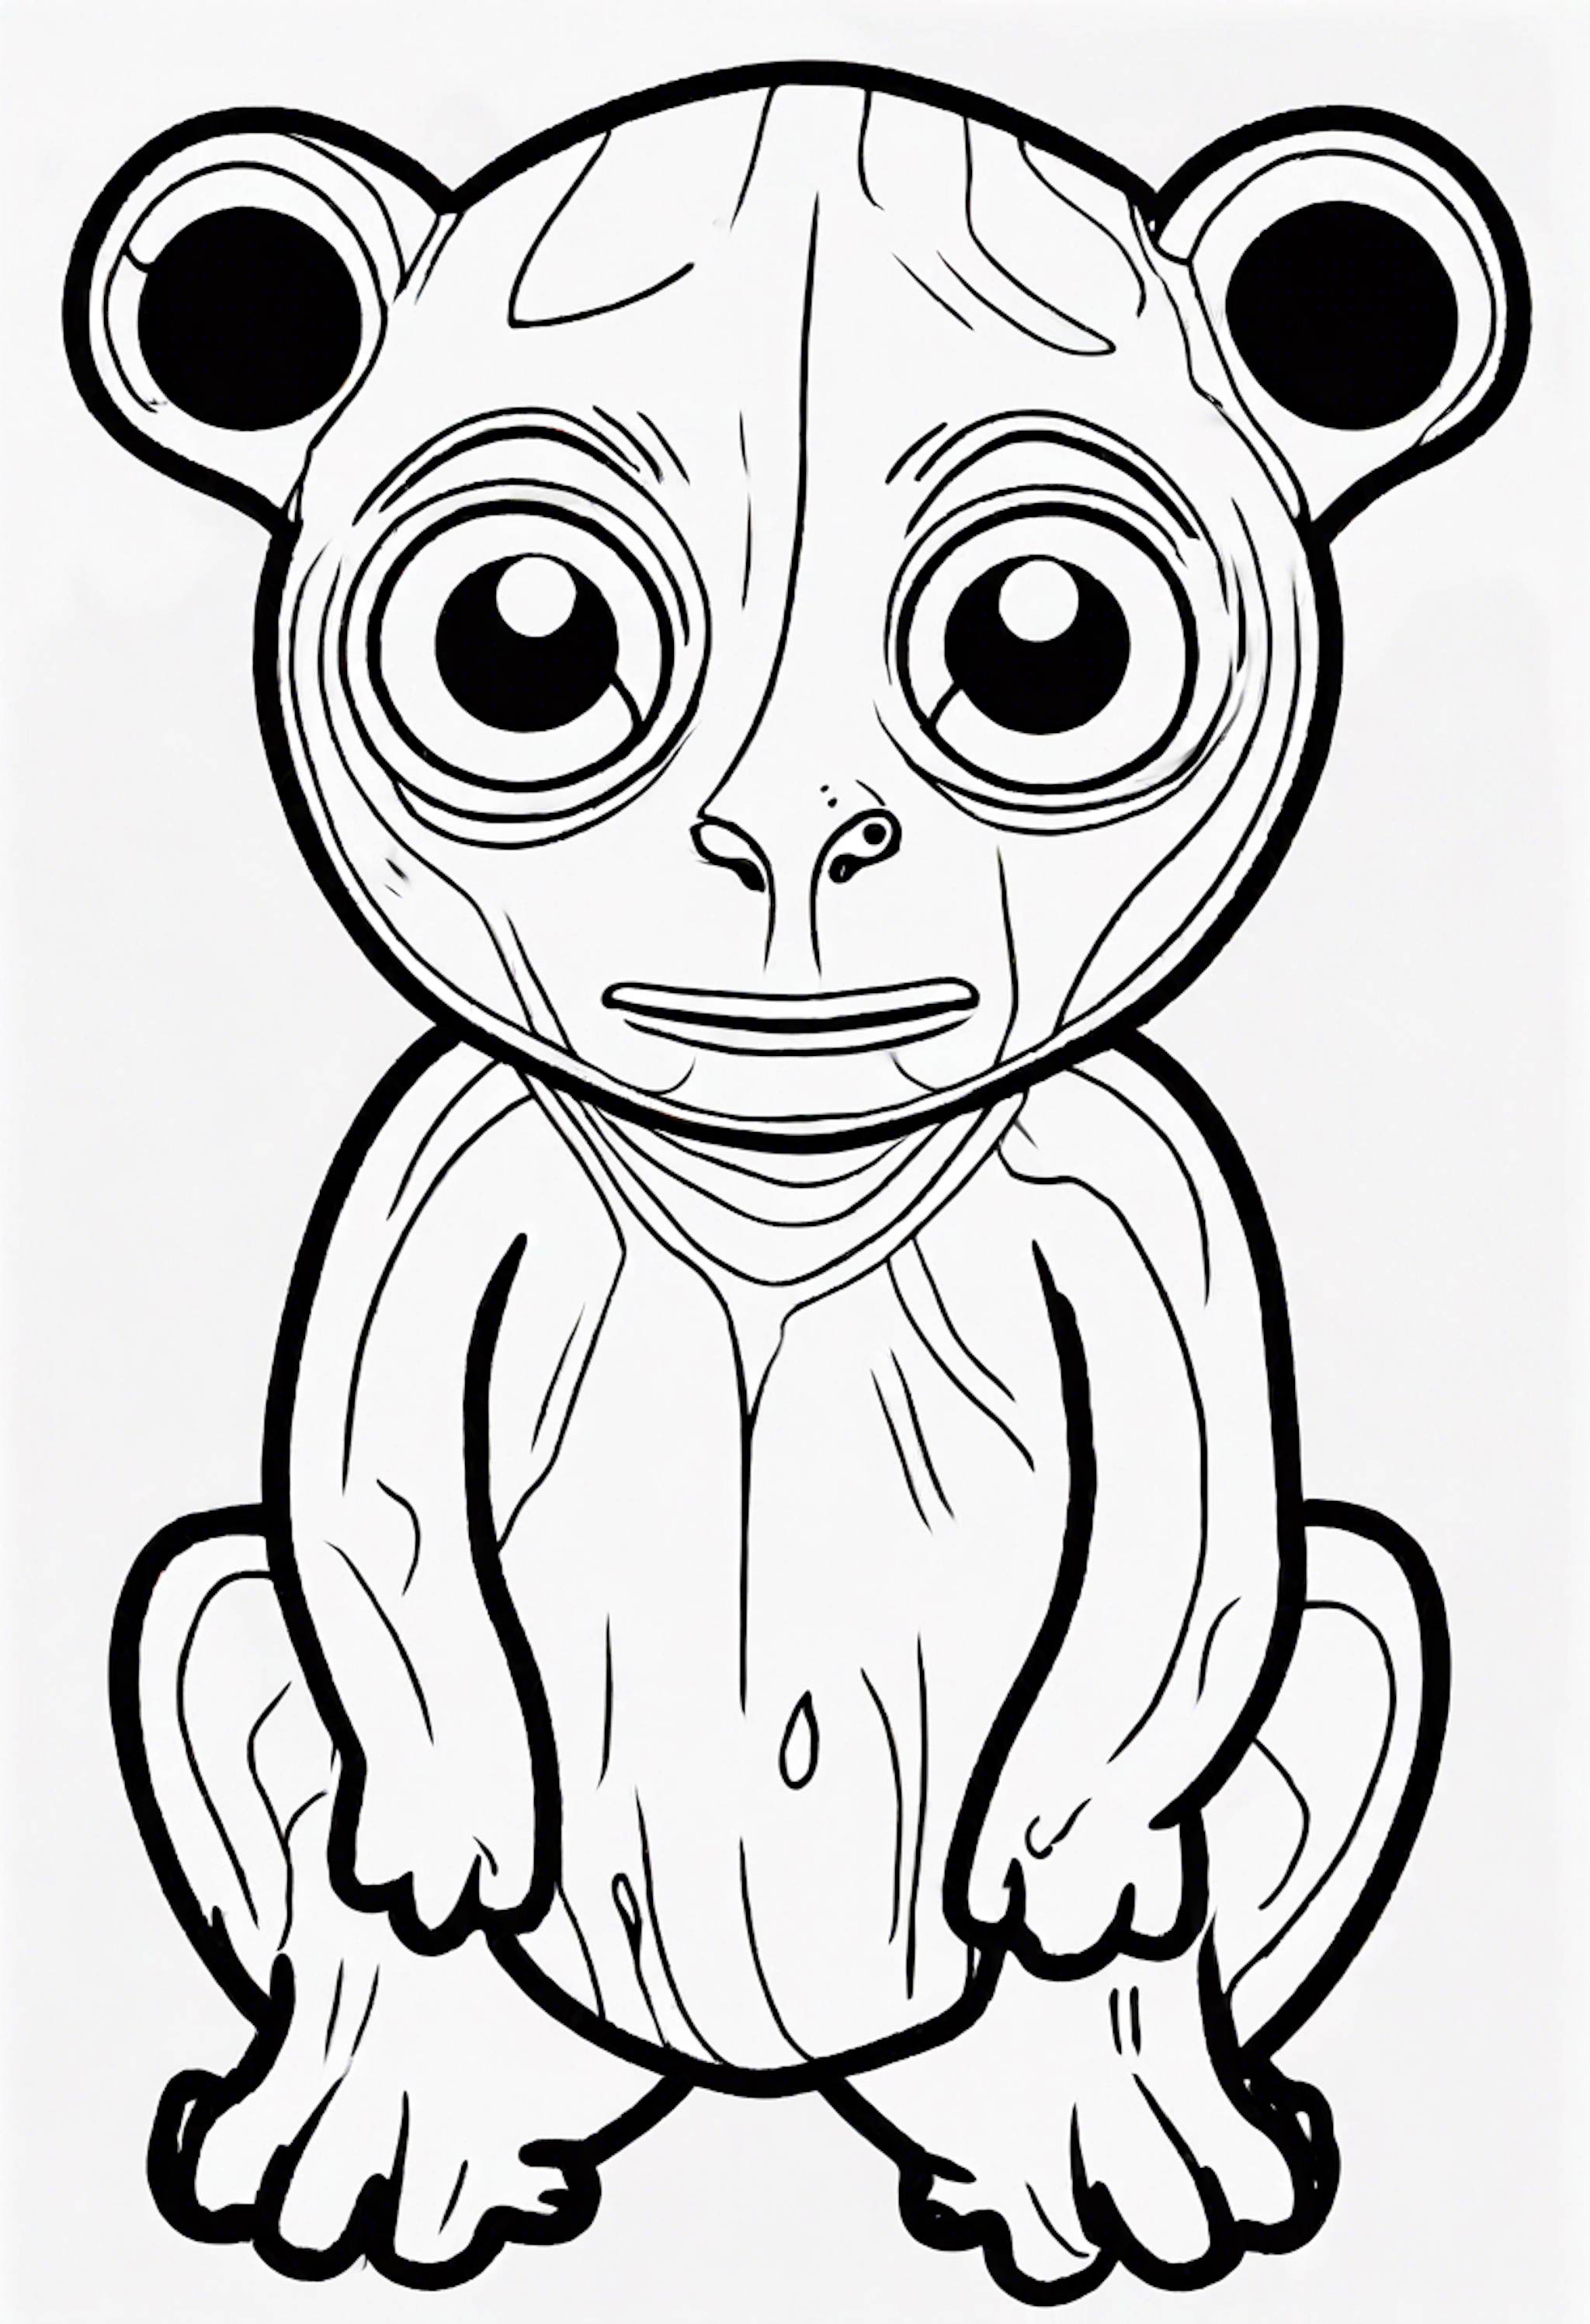 A coloring page for 1 Huggy Wuggy coloring pages